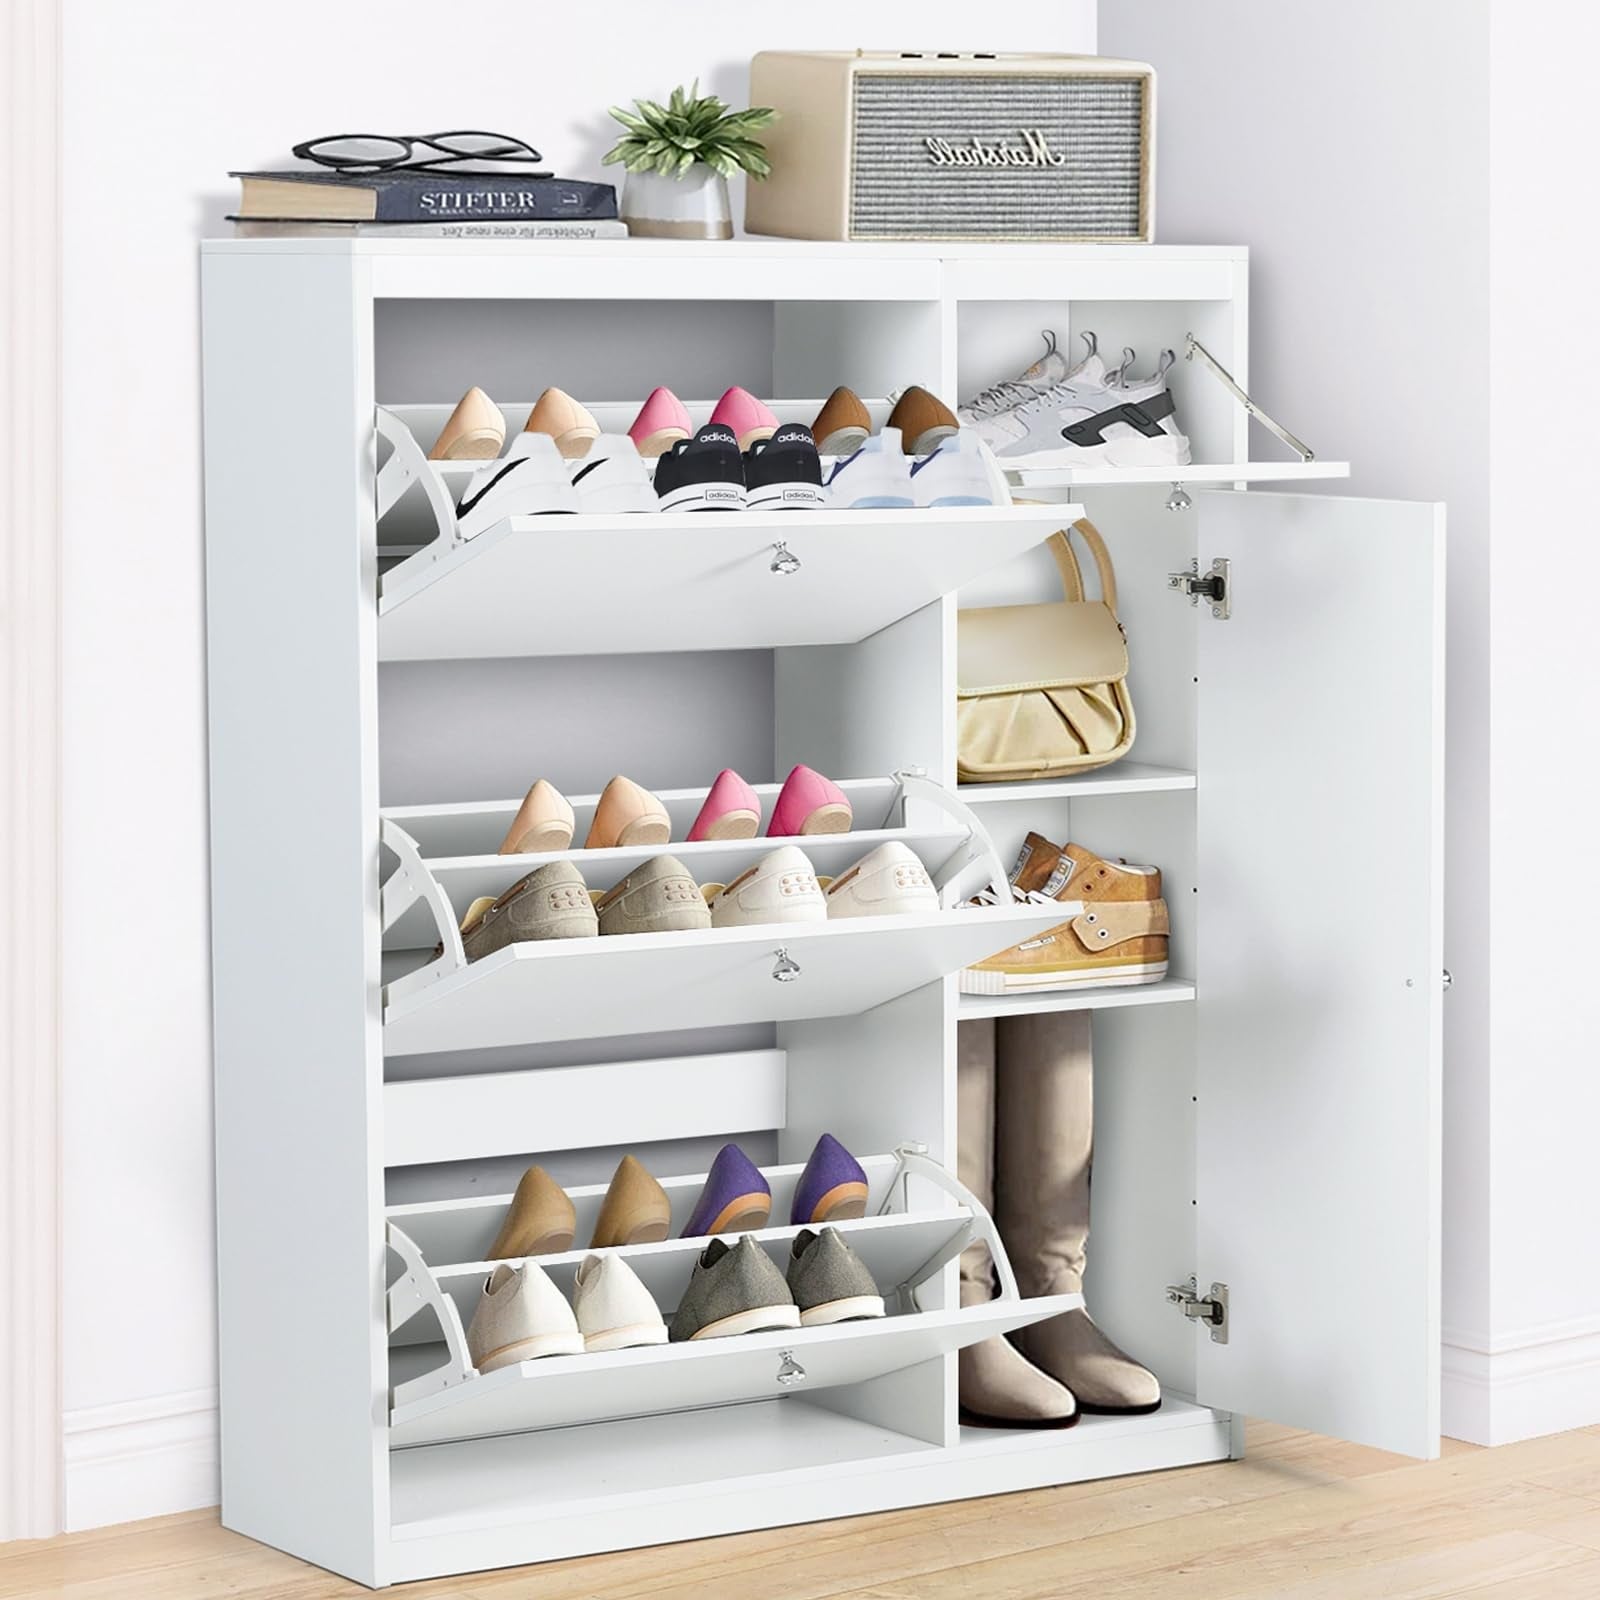 https://ak1.ostkcdn.com/images/products/is/images/direct/d9e3c67969e794f00a59b1ed8b20912ca6b2b7a1/Shoe-Storage-Cabinet-for-Entryway%2C-Hidden-Shoe-Organizer-Cabinet-with-Door-and-3-Flip-Down-Drawers%2C-Modern-Shoe-Storage-Cabinet.jpg